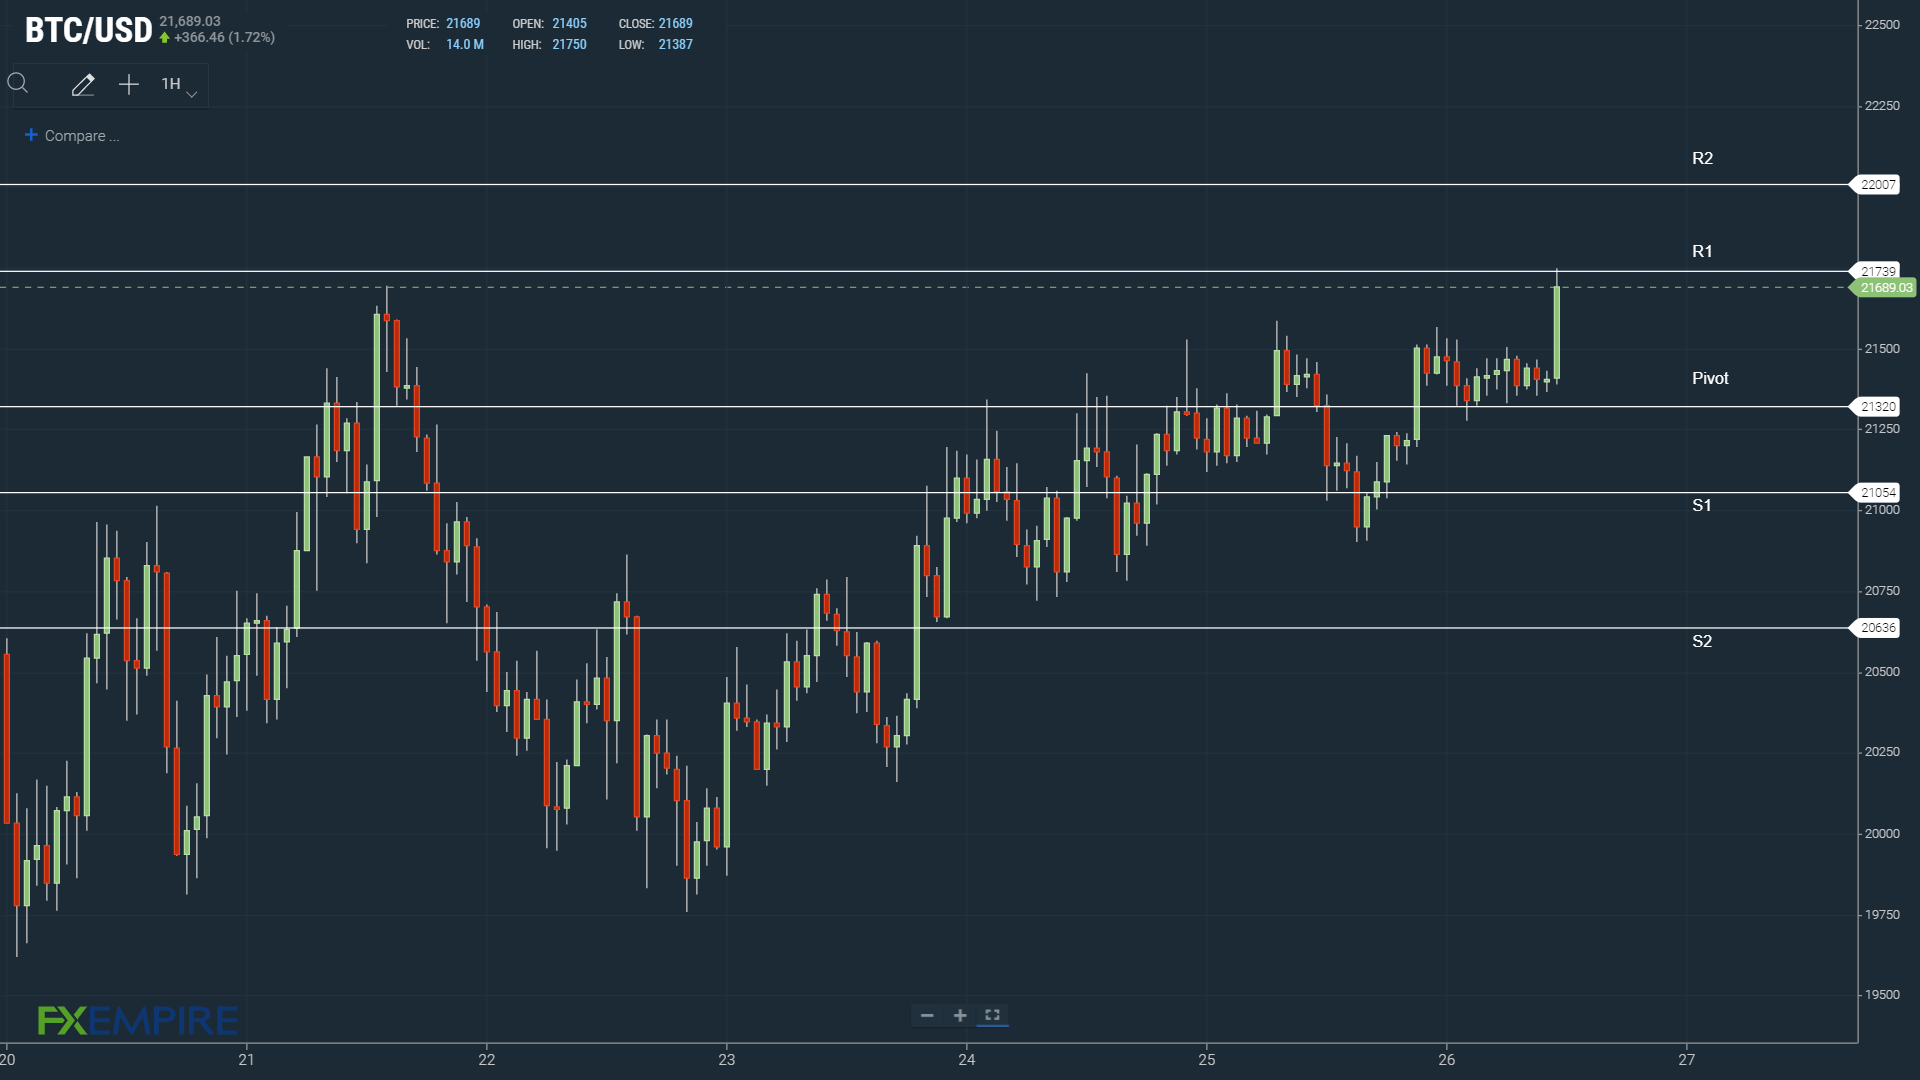 BTC resistance levels tested early.